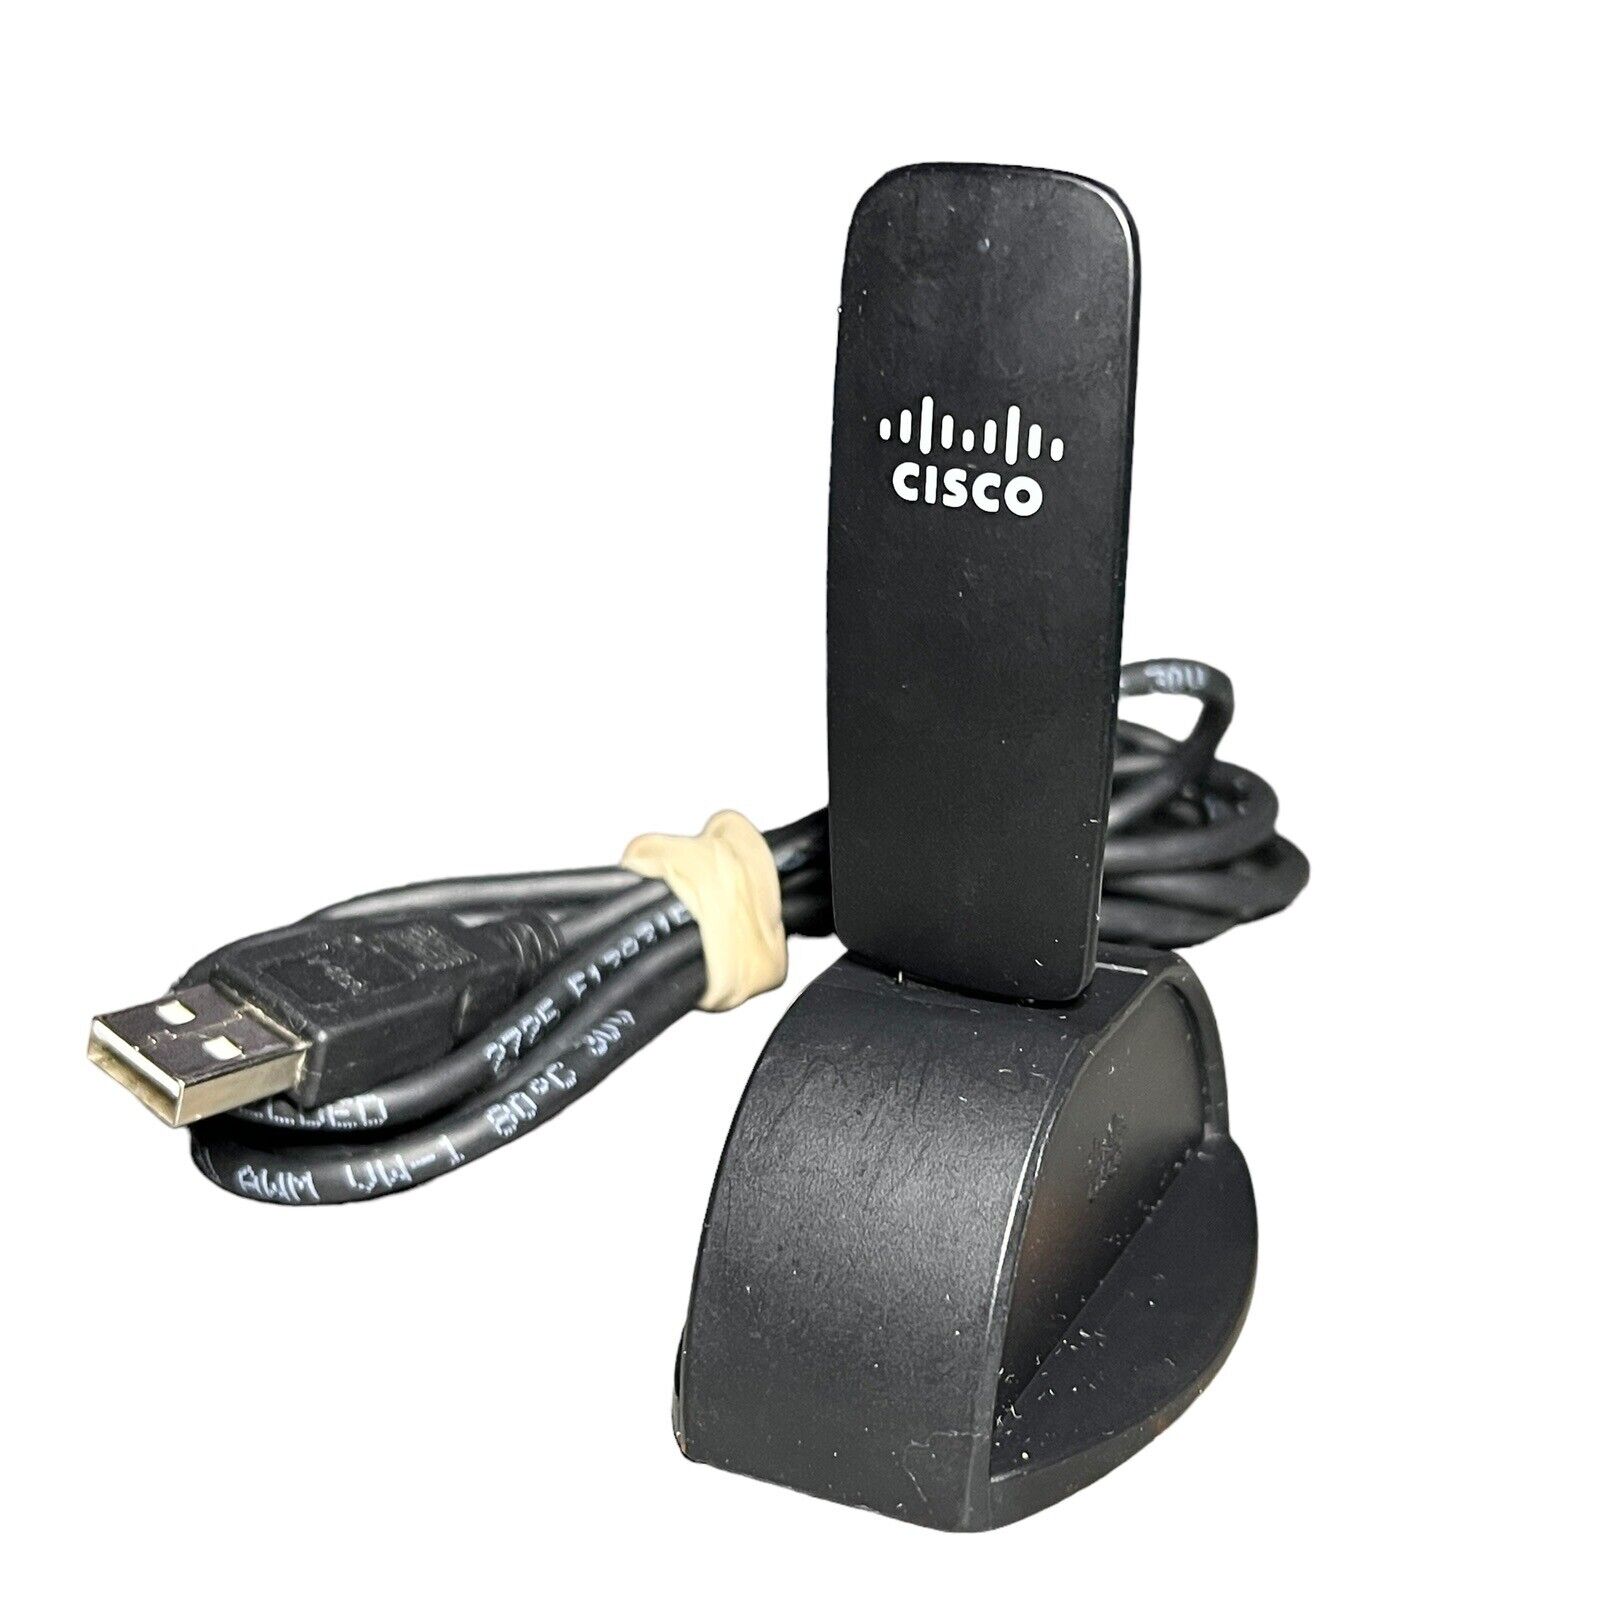 Cisco Linksys AE1200 Wireless USB Internet Router With Wired USB Base 